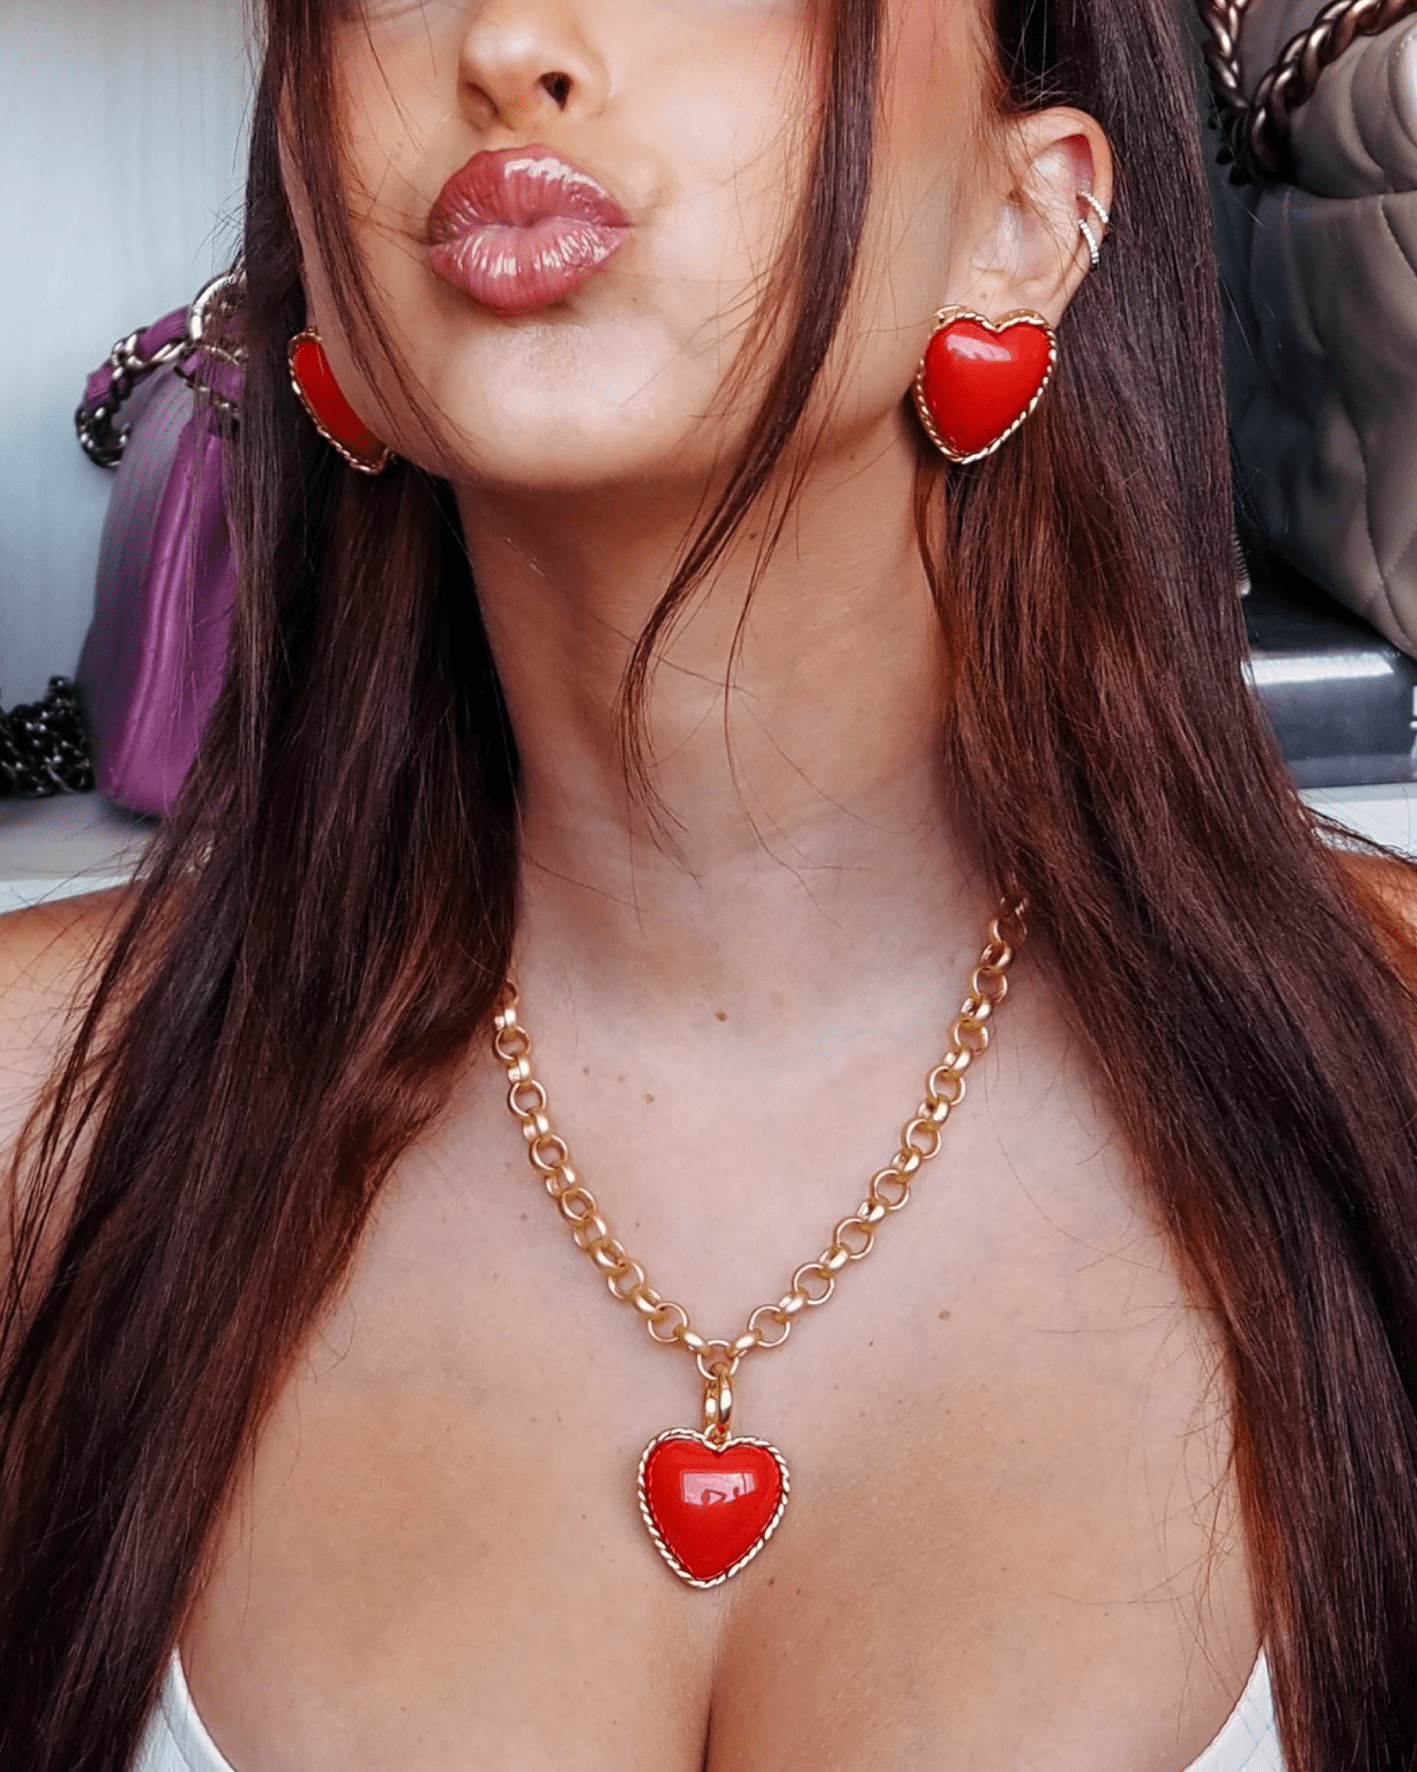 Red Hot Necklace